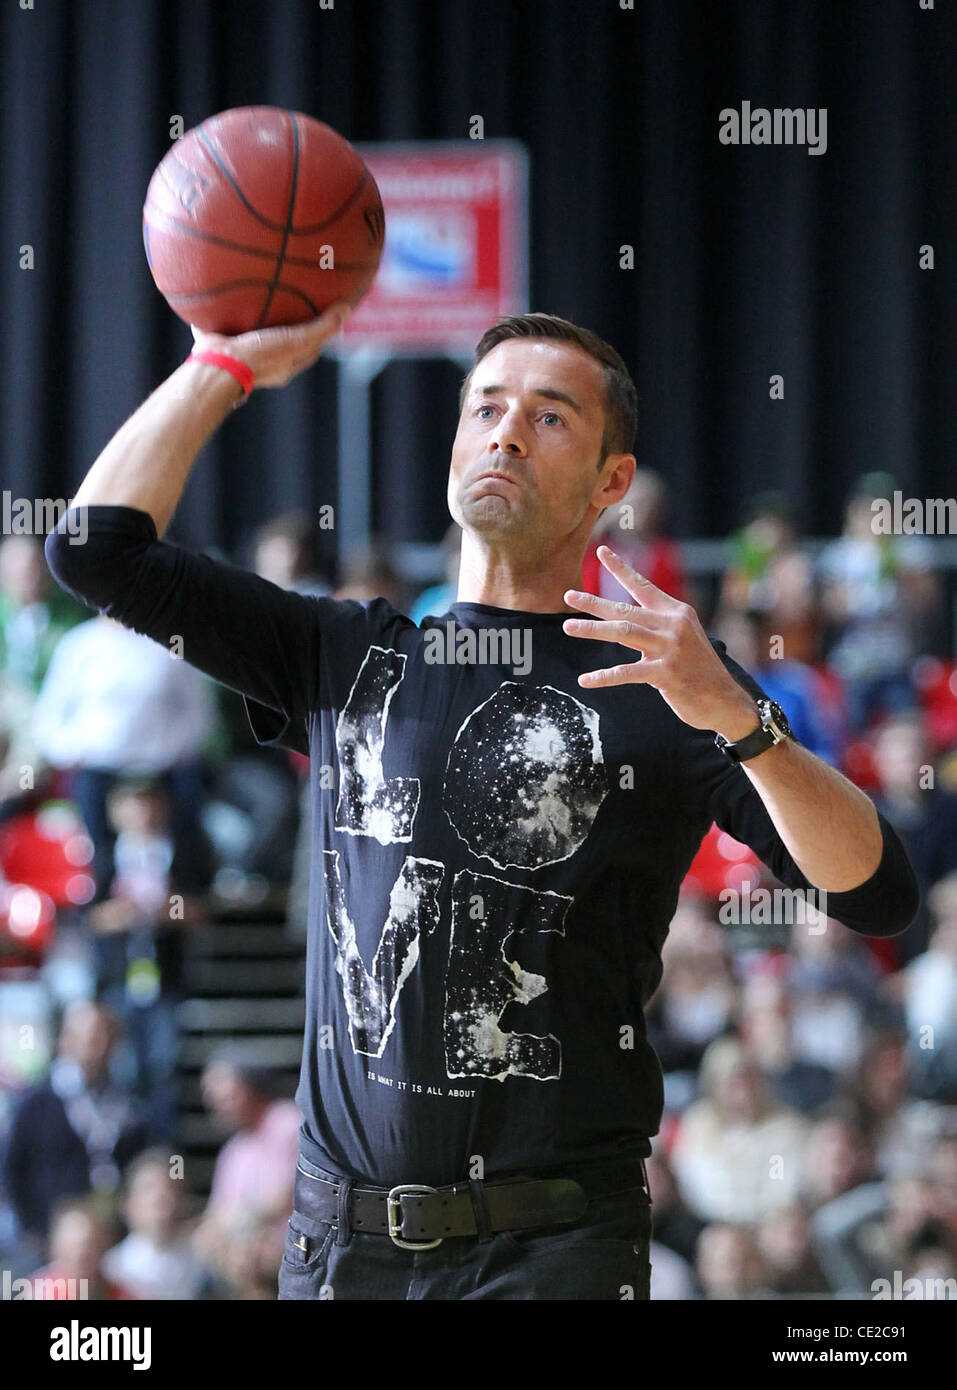 Kai Pflaume throwing a ball during the intermission of a basketball match  between FC Bayern and ETB Essen at Olymiahalle hall. The German TV host  missed the hoop and the chance to